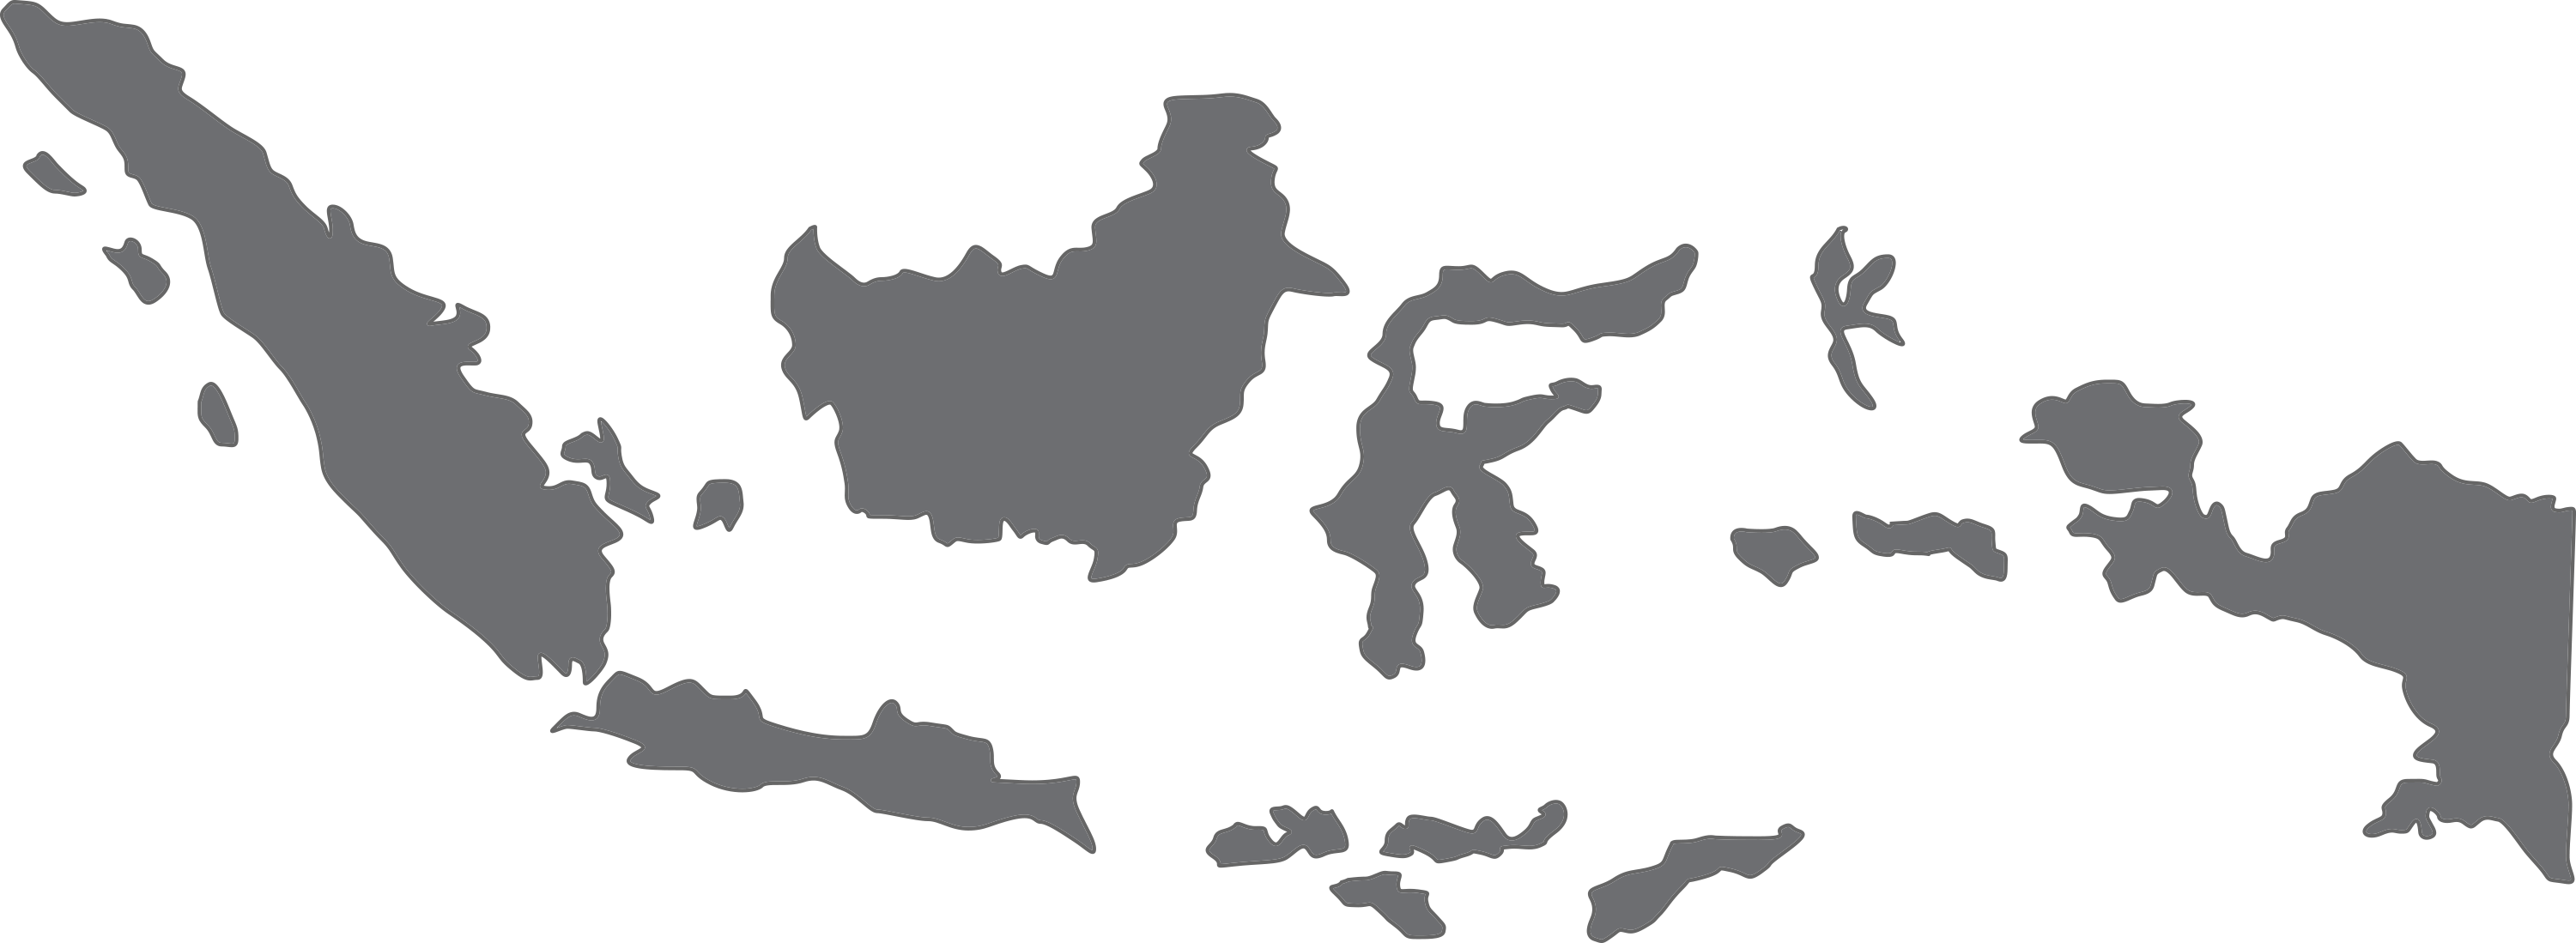 Map Globe Indonesia Blank Hq Image Free Png